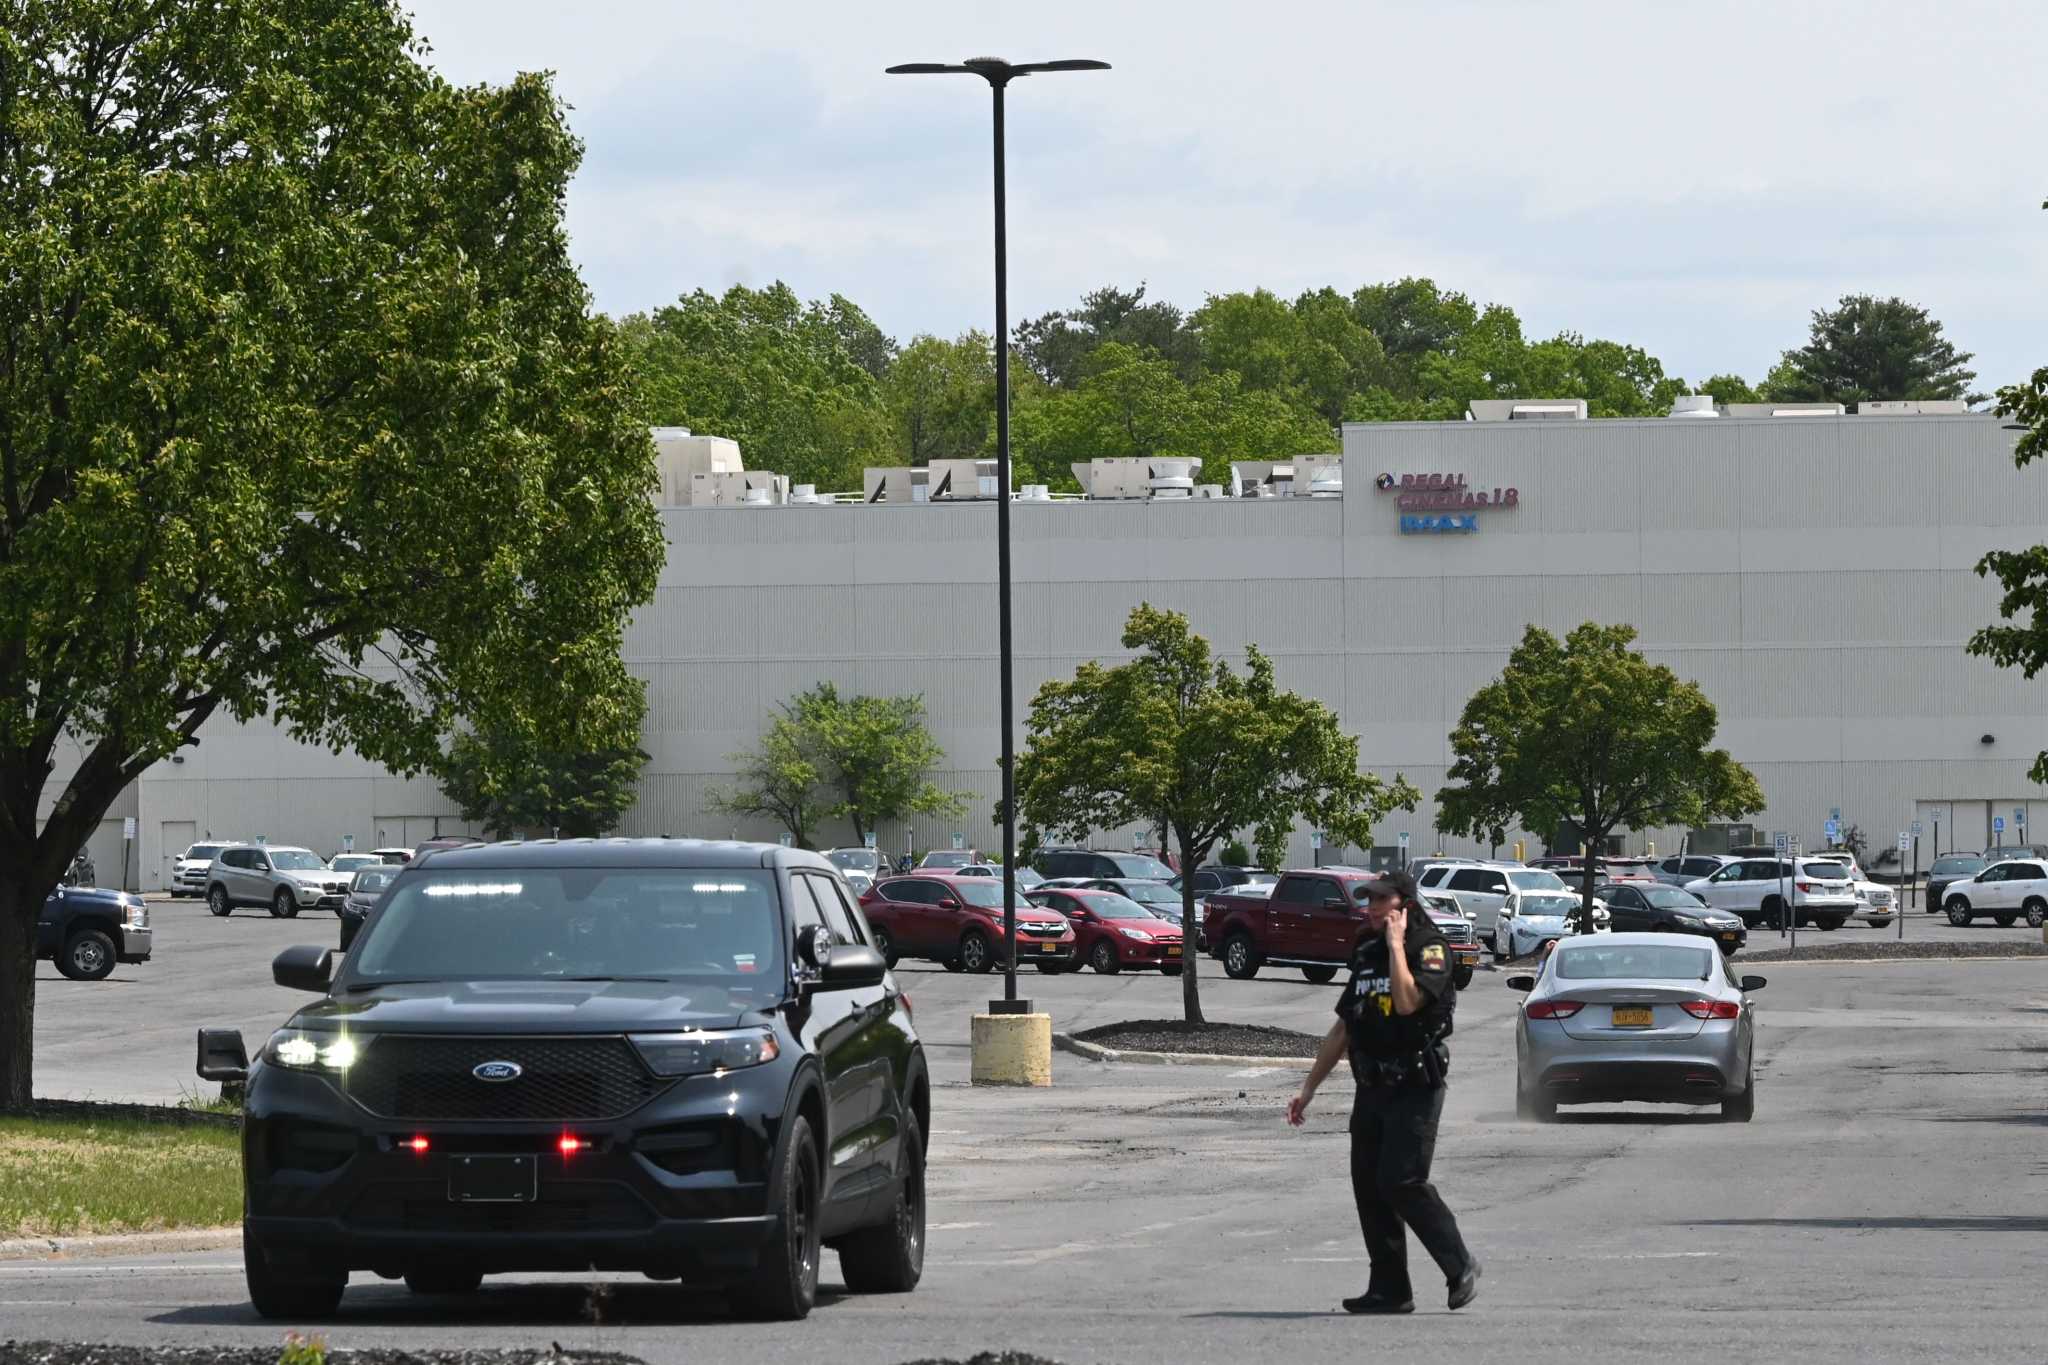 Two teens arrested after shots fired near Valley Fair Mall